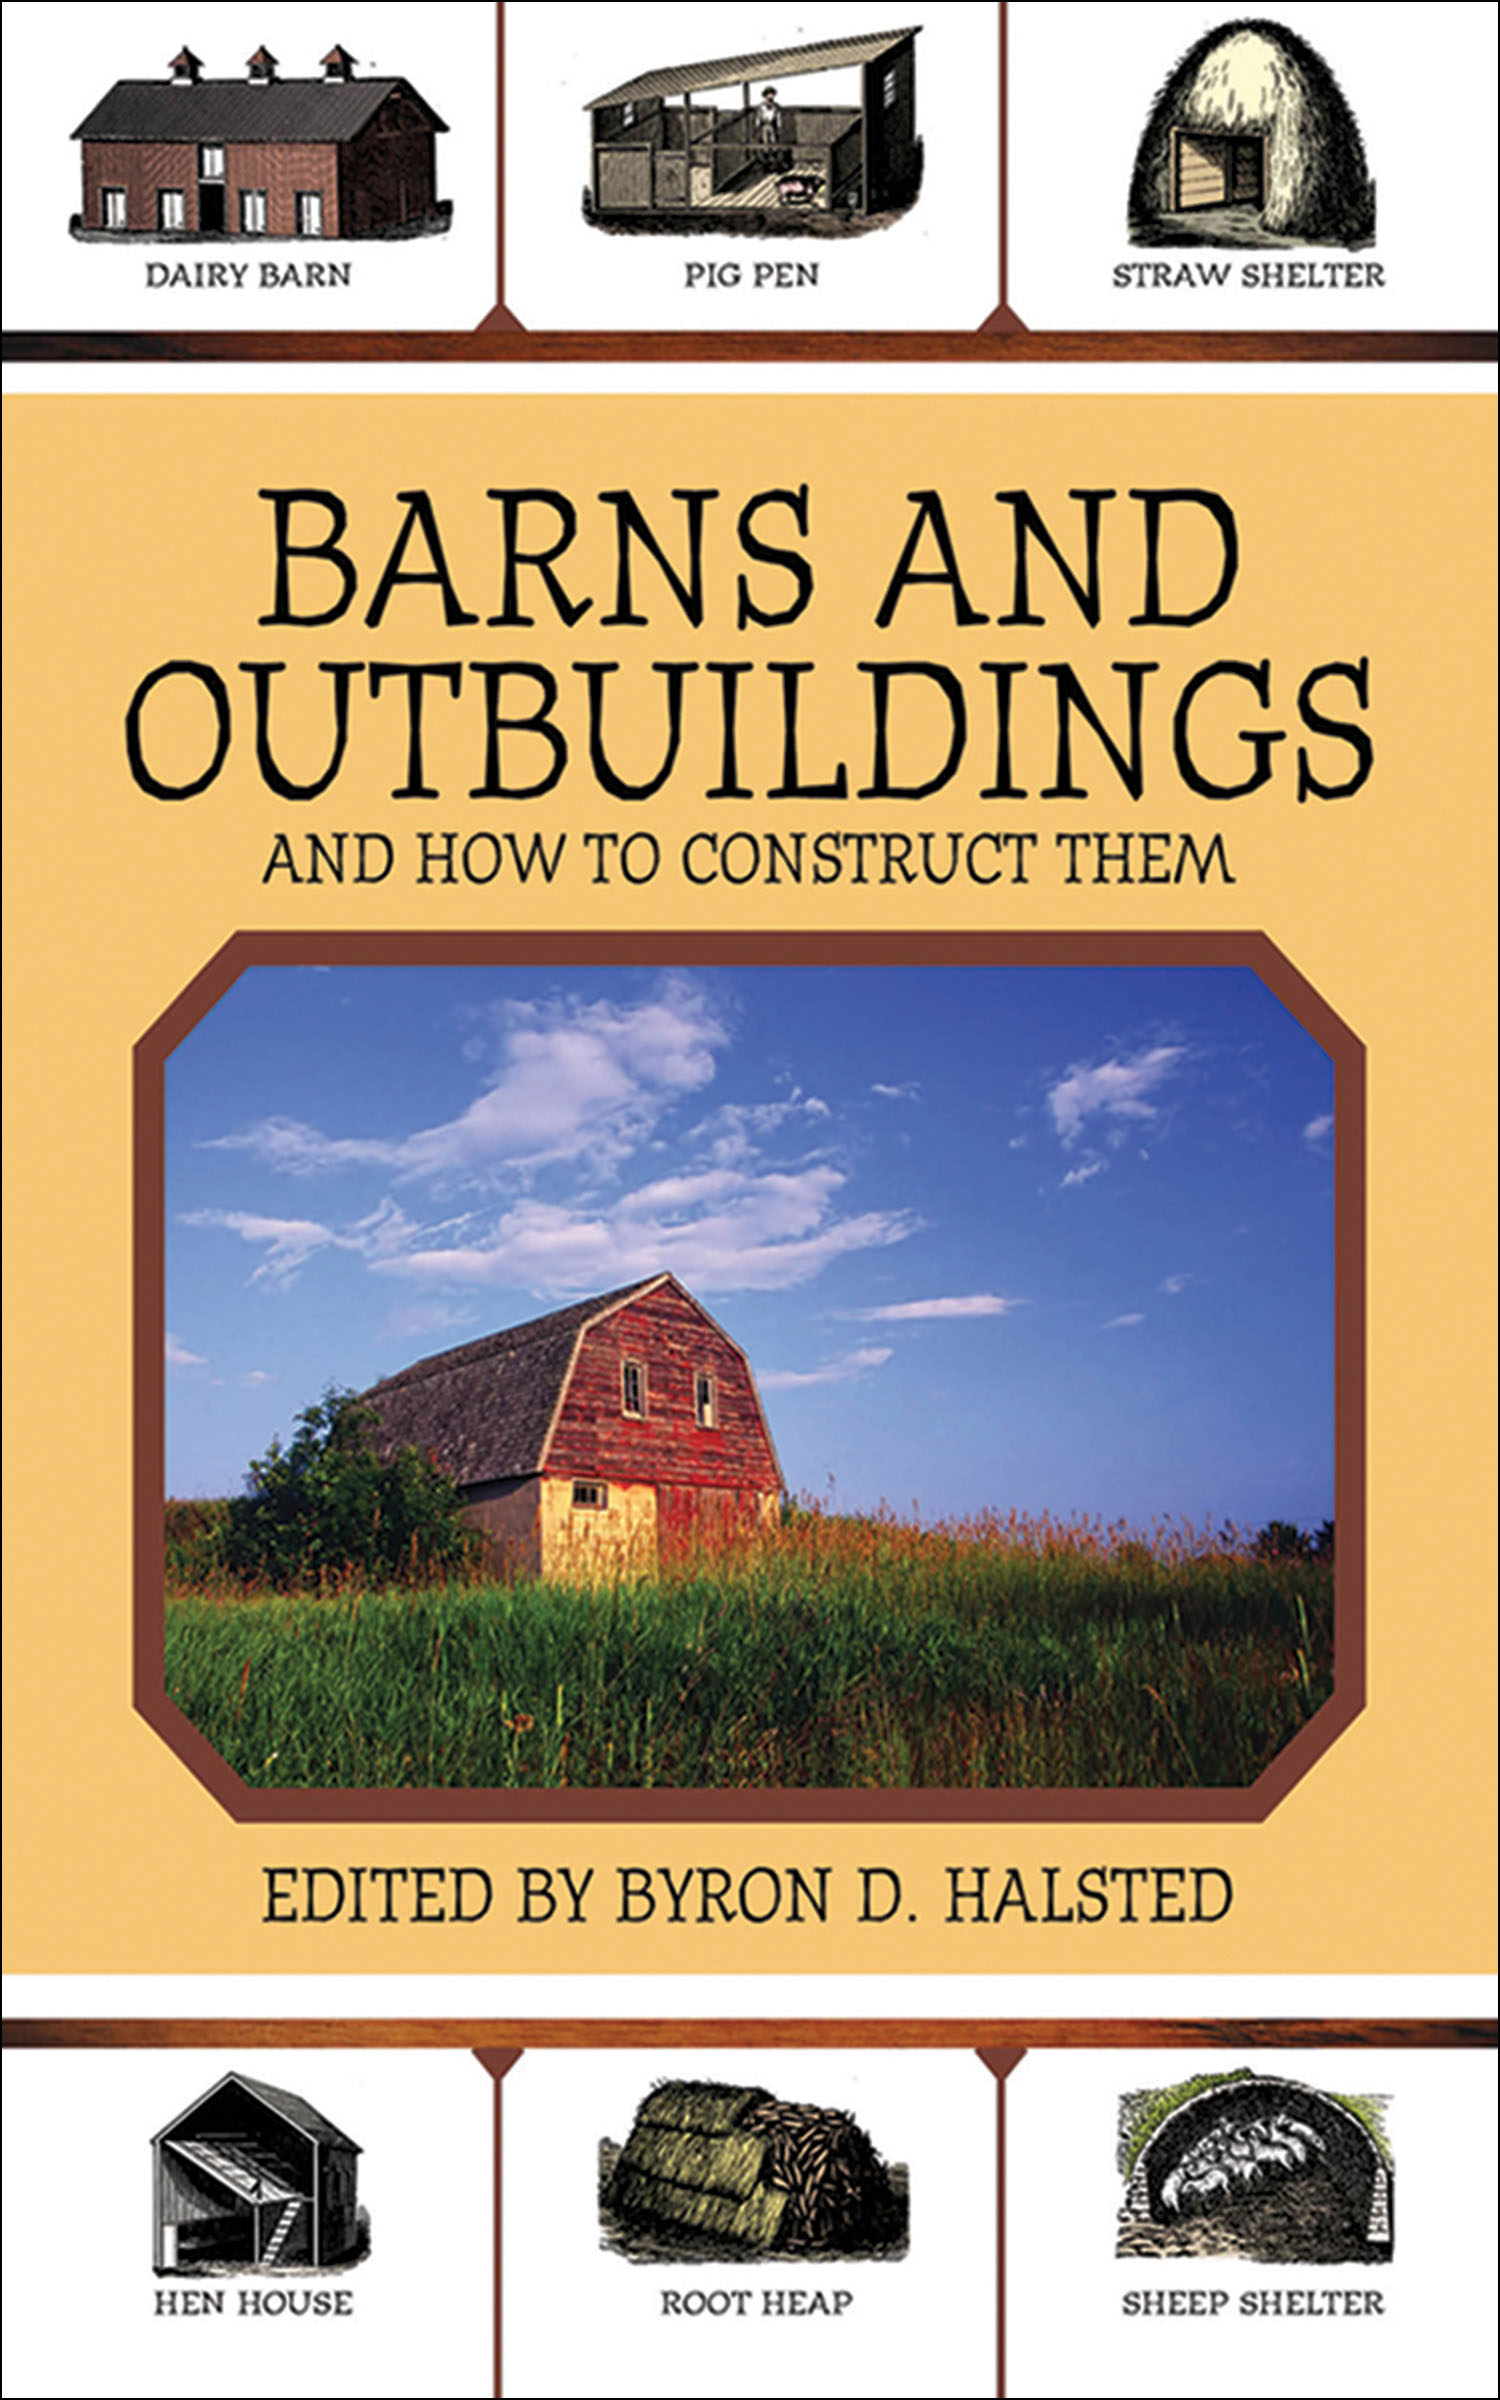 Barns and Outbuildings - 15-24.99